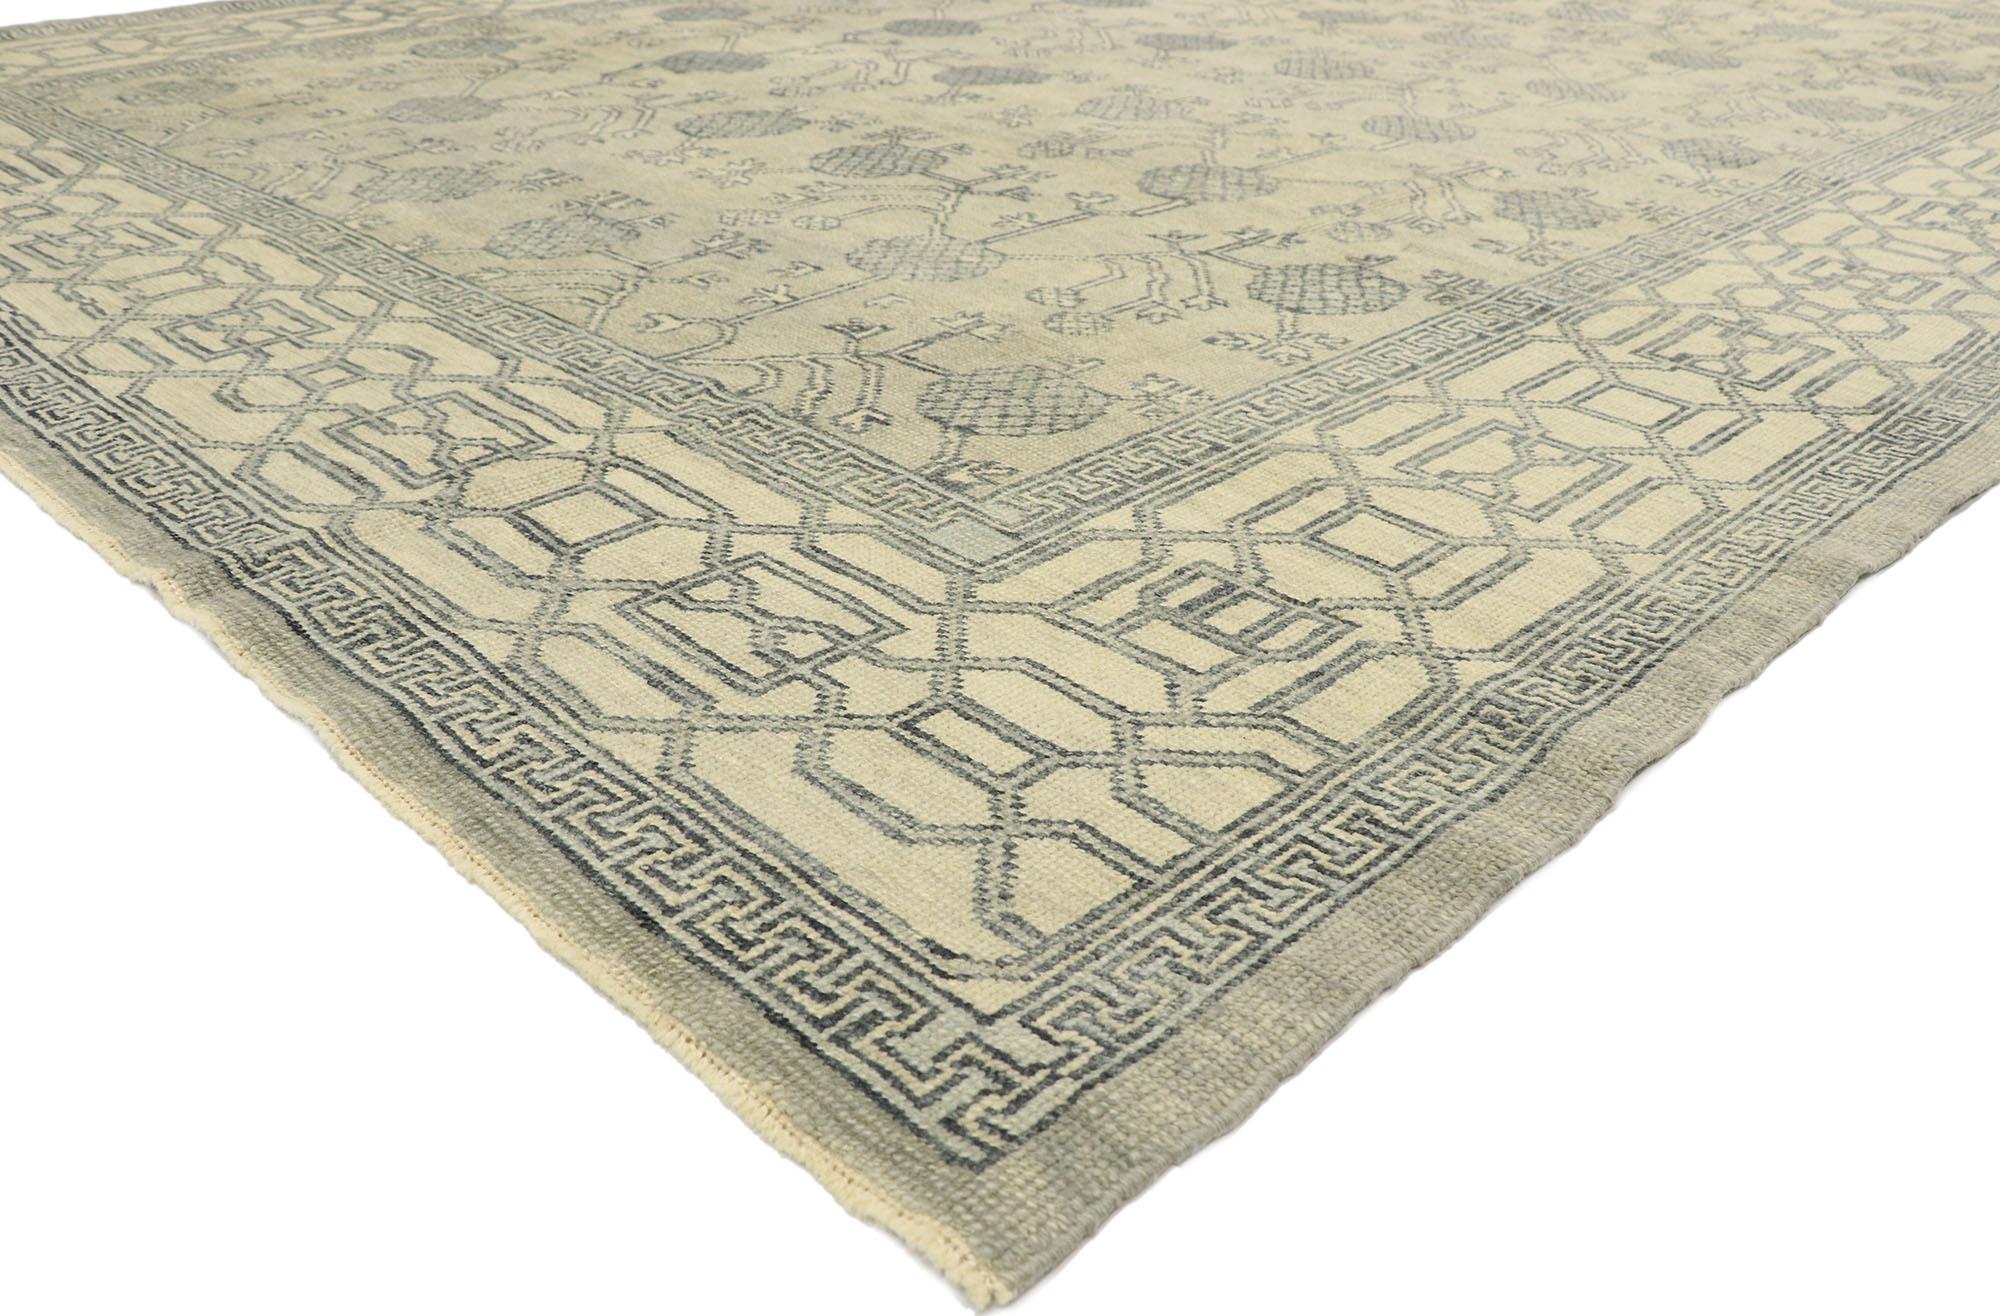 52898 New Contemporary Turkish Khotan Rug with Modern Transitional Style 09'01 x 12'09. Blending elements from the modern world with light and airy colors, this hand knotted wool contemporary Turkish Khotan rug will boost the coziness factor in